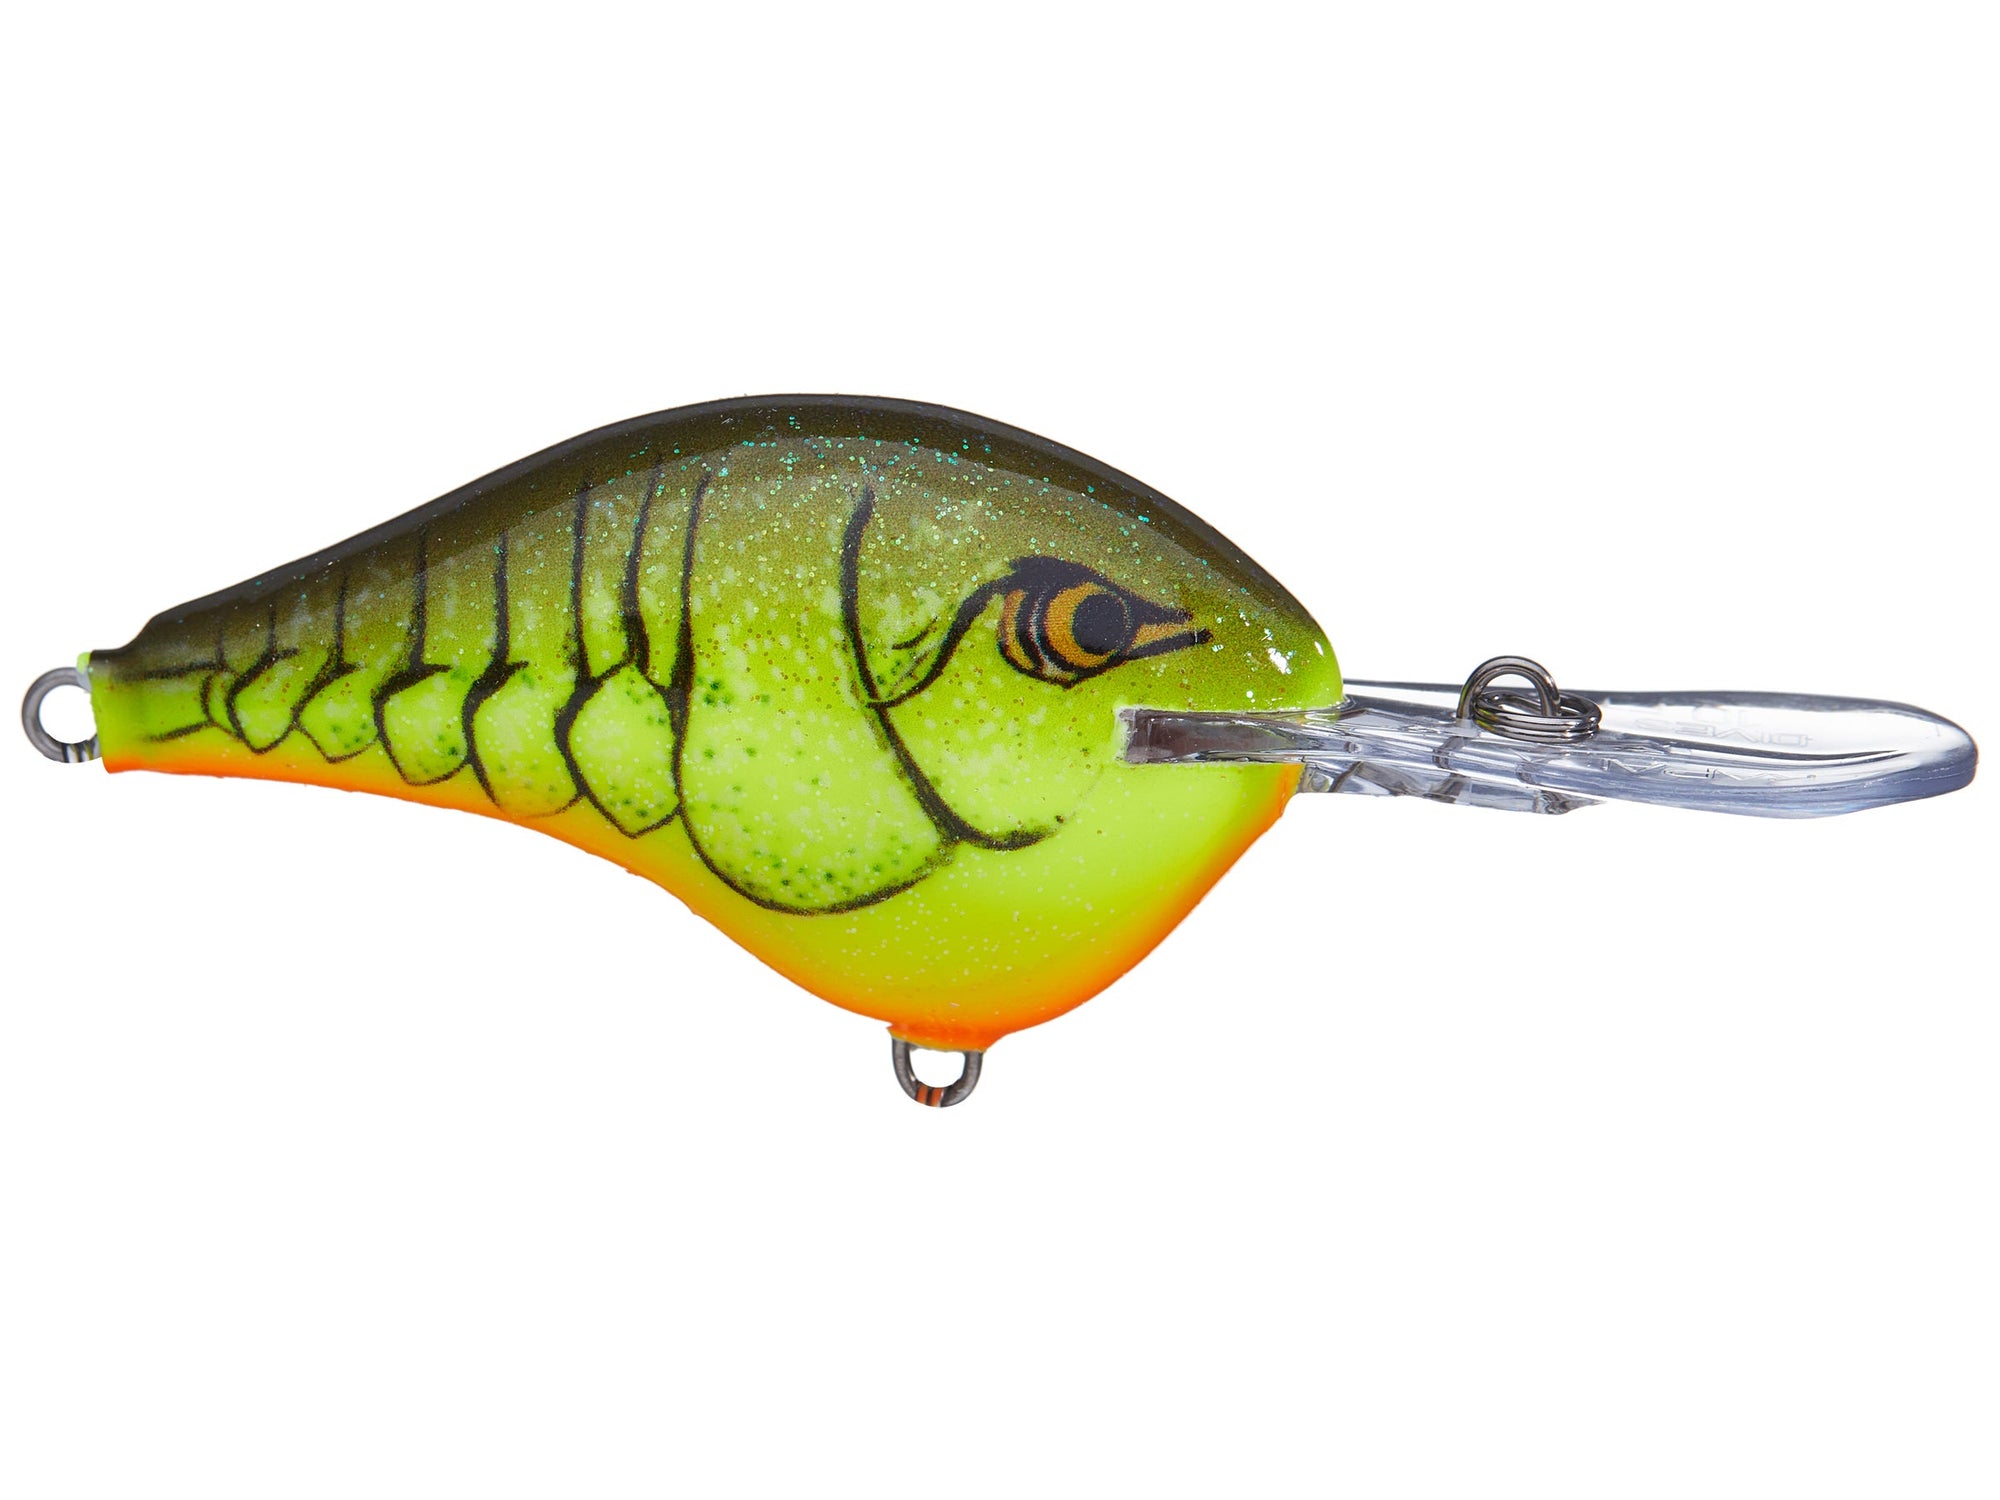 Rapala DT 10 Green Gizzard Shad